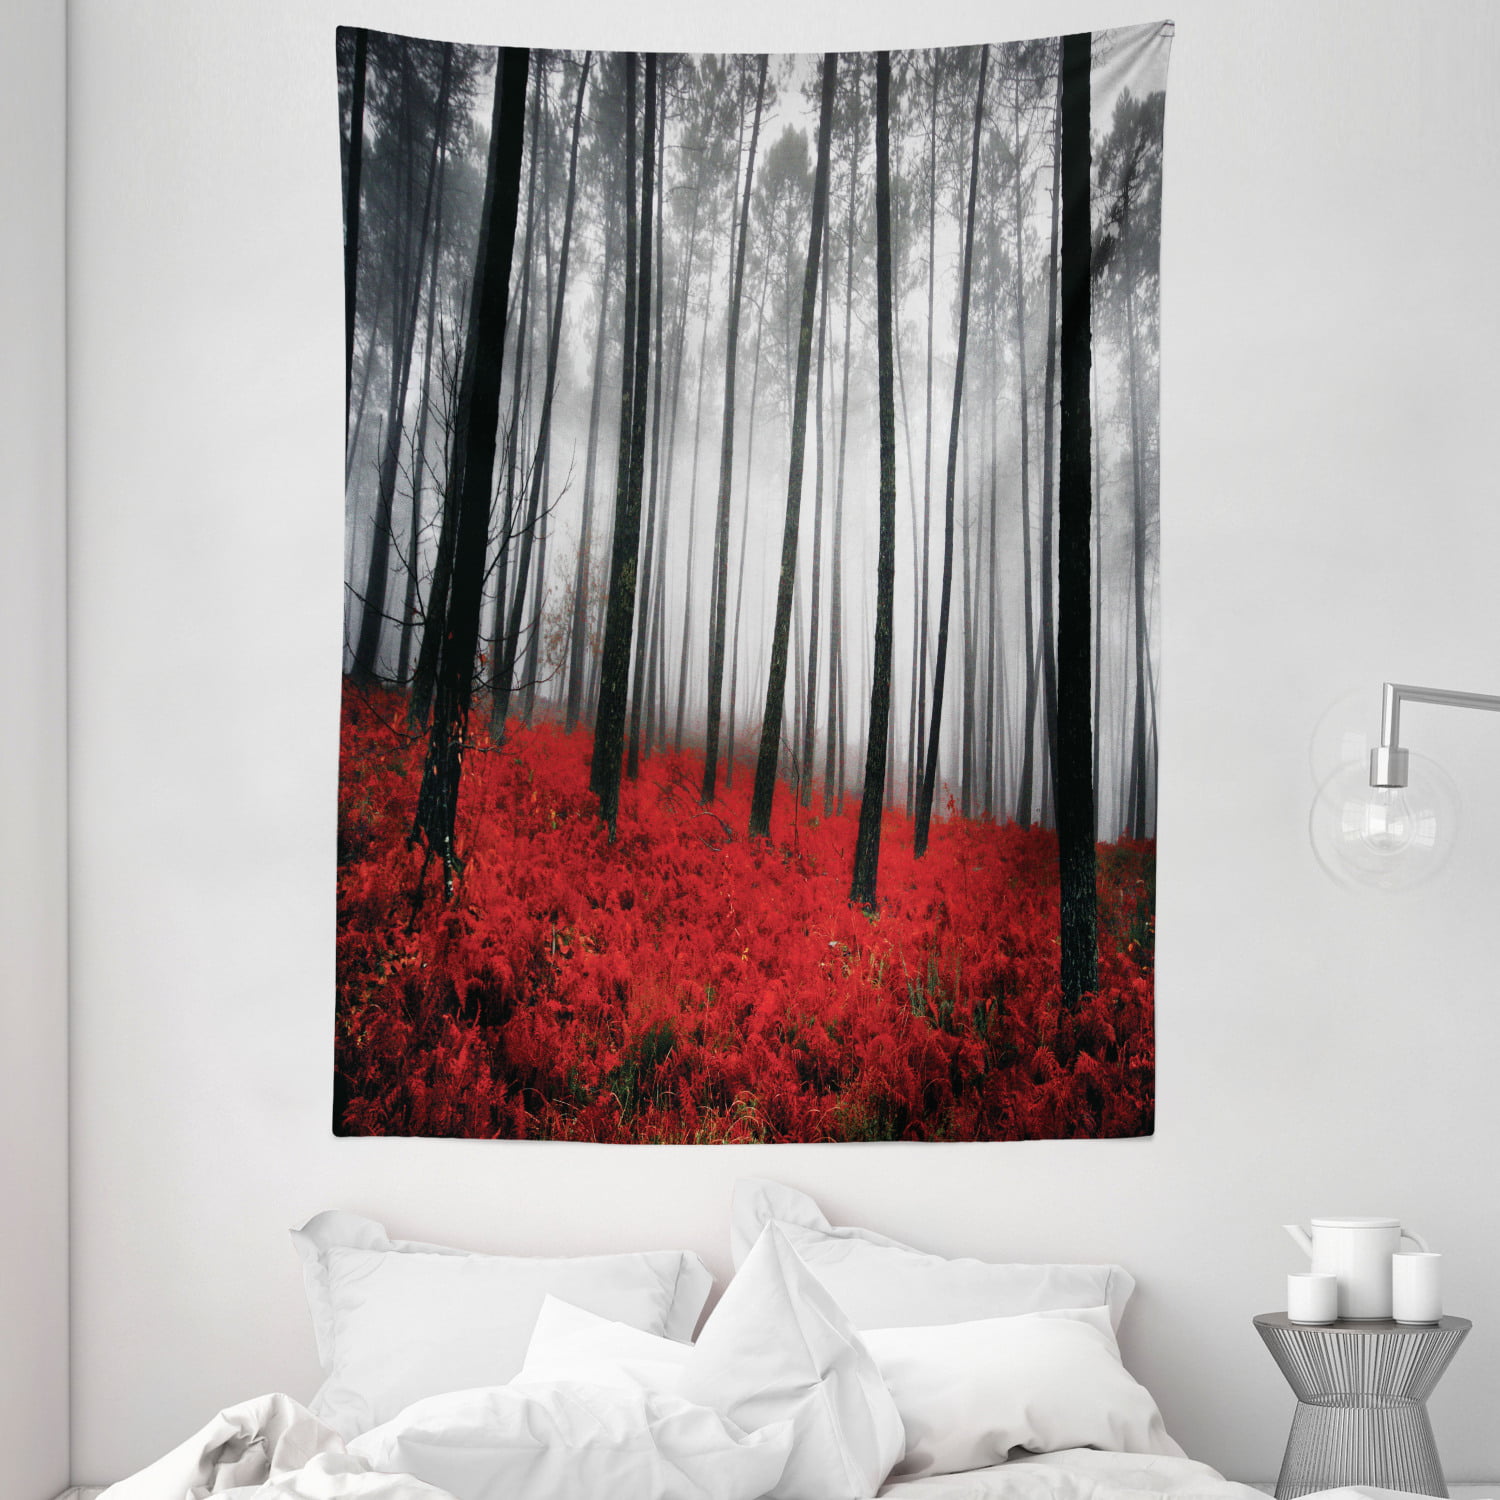 Thick fog over the forest Tapestry Wall Hanging Living Room Bedroom Dorm Decor 